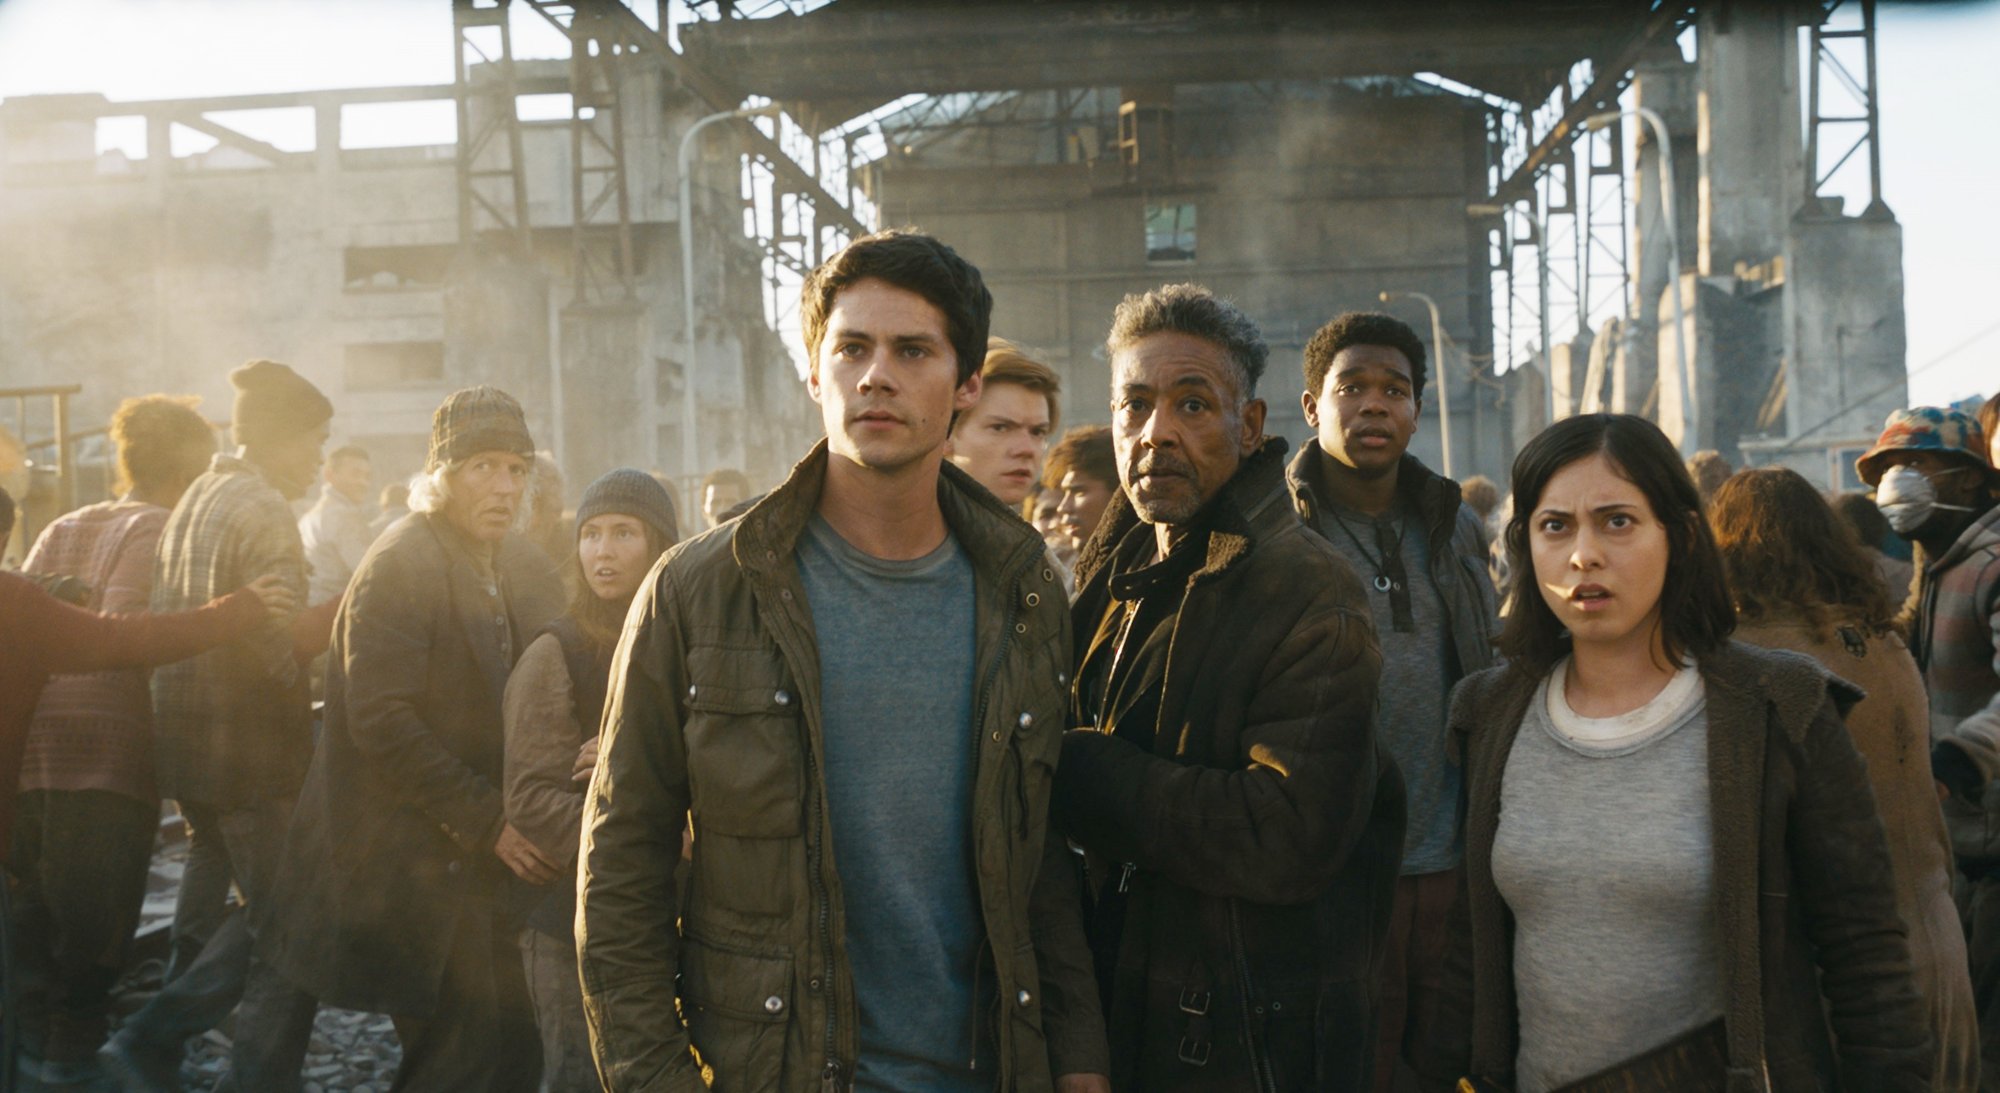 Dylan O'Brien, Thomas Sangster, Giancarlo Esposito, Dexter Darden and Rosa Salazar in 20th Century Fox's Maze Runner: The Death Cure (2018)